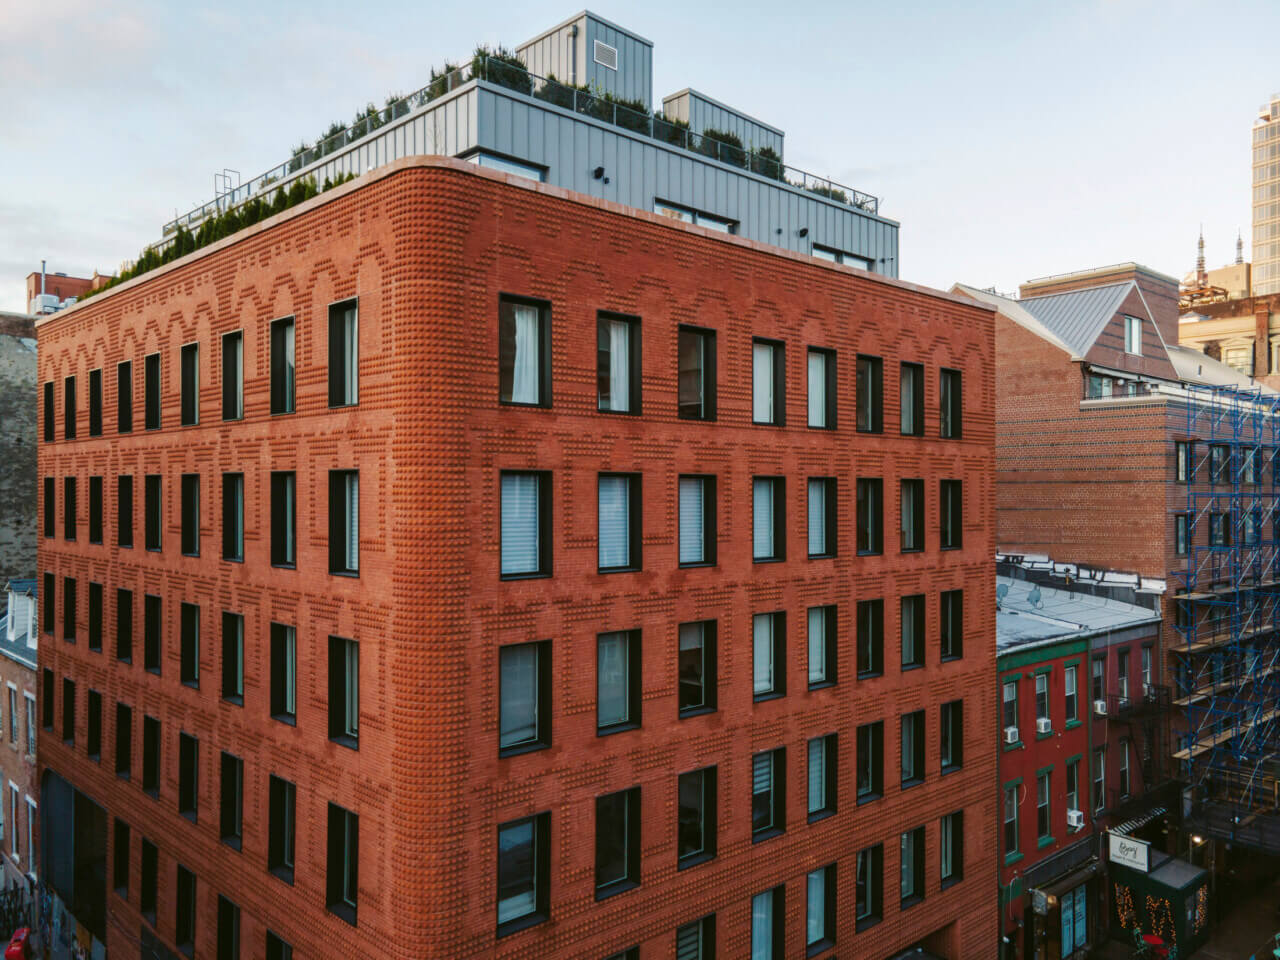 The Grand Mulberry uses custom-formed brick on a New York facade